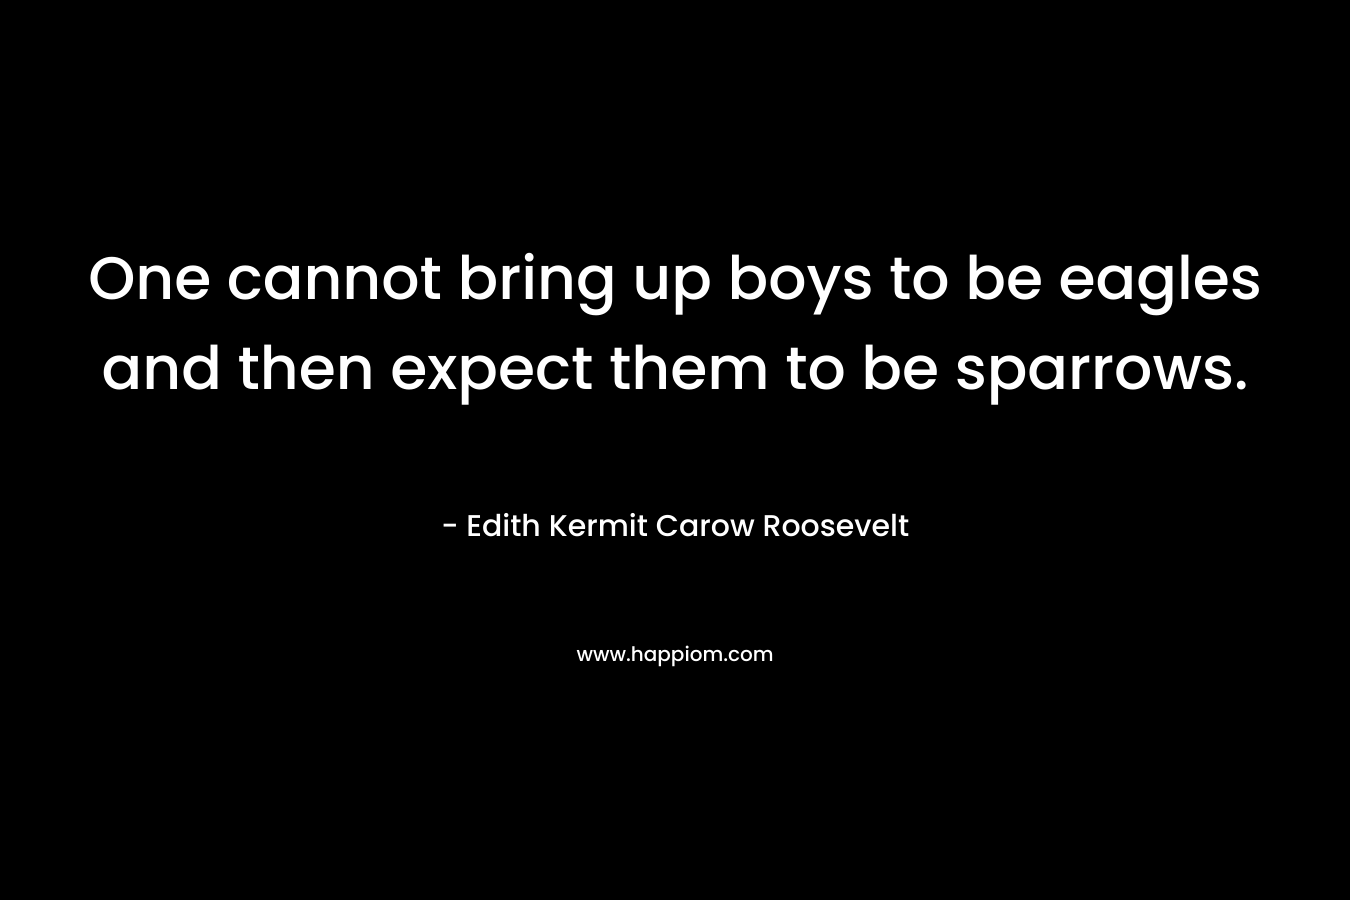 One cannot bring up boys to be eagles and then expect them to be sparrows. – Edith Kermit Carow Roosevelt